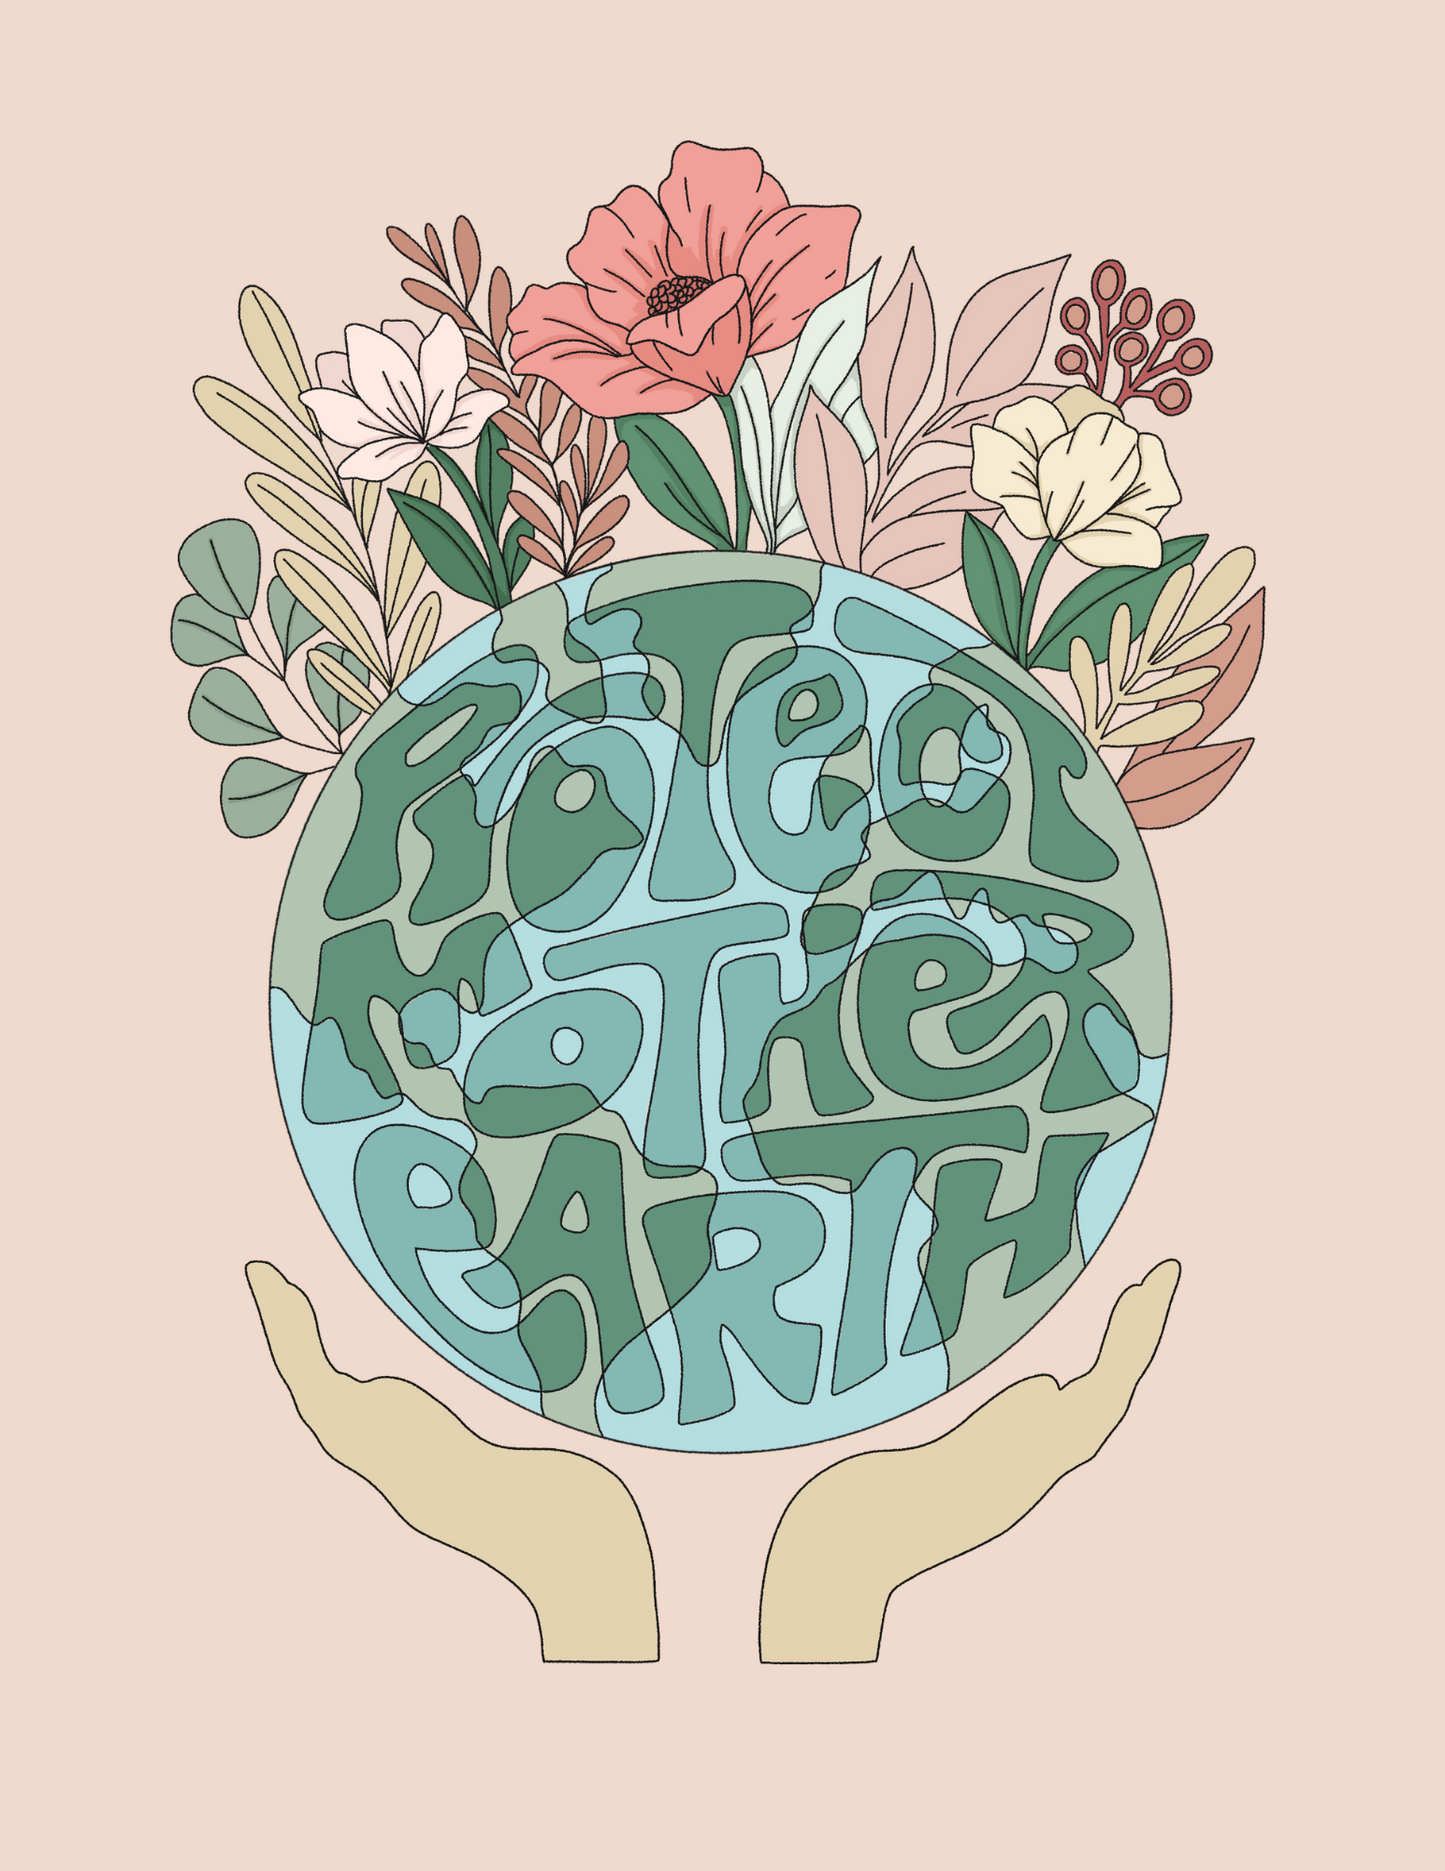 Protect Mother Earth | Framable Art Prints